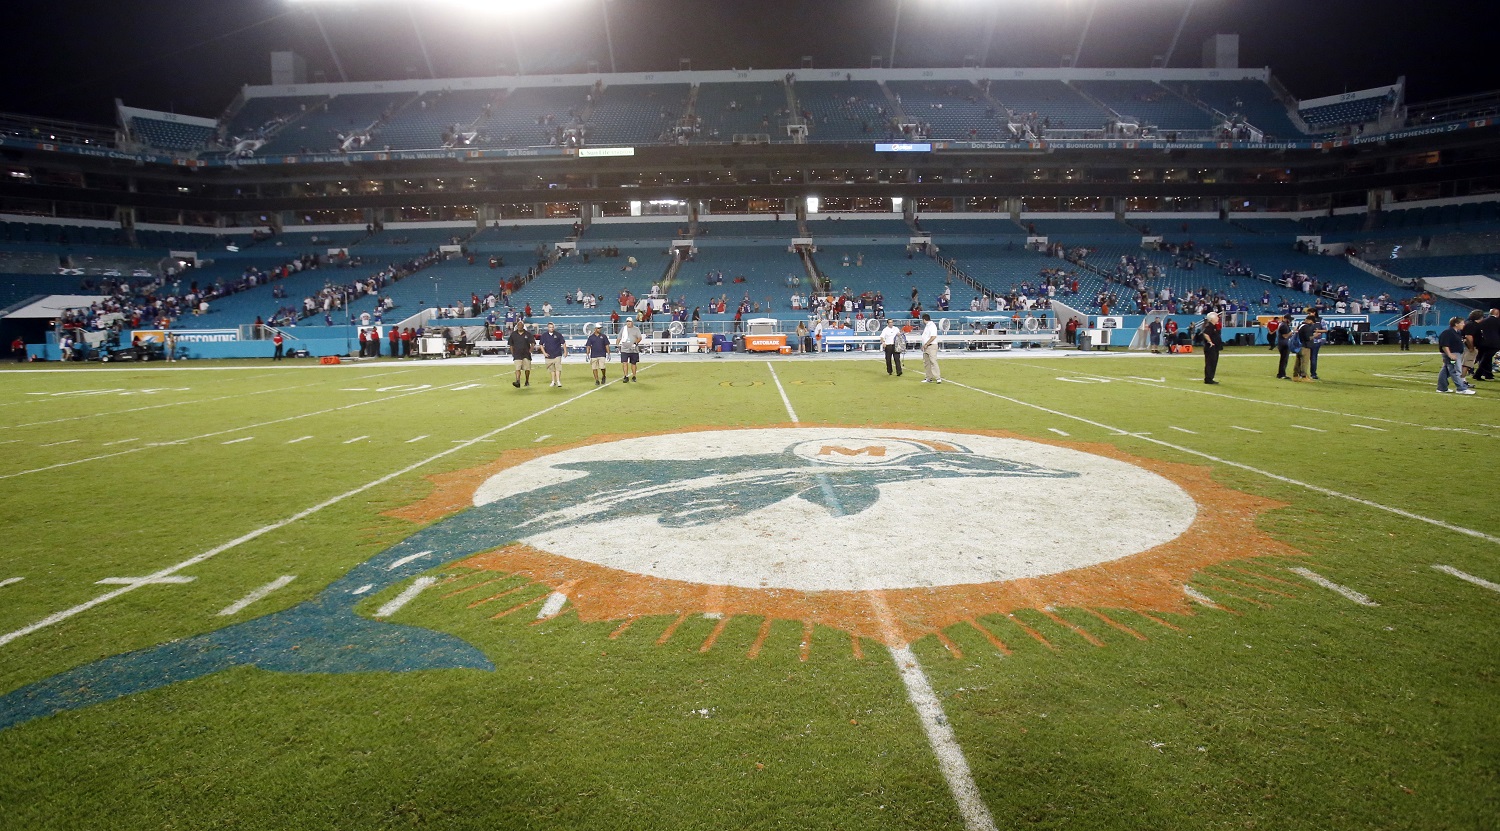 The Miami Dolphins original logo is painted on Sun Life Stadium during an NFL football game against the New York Giants, Monday, Dec. 14, 2015, in Miami Gardens, Fla.  (AP Photo/Wilfredo Lee)